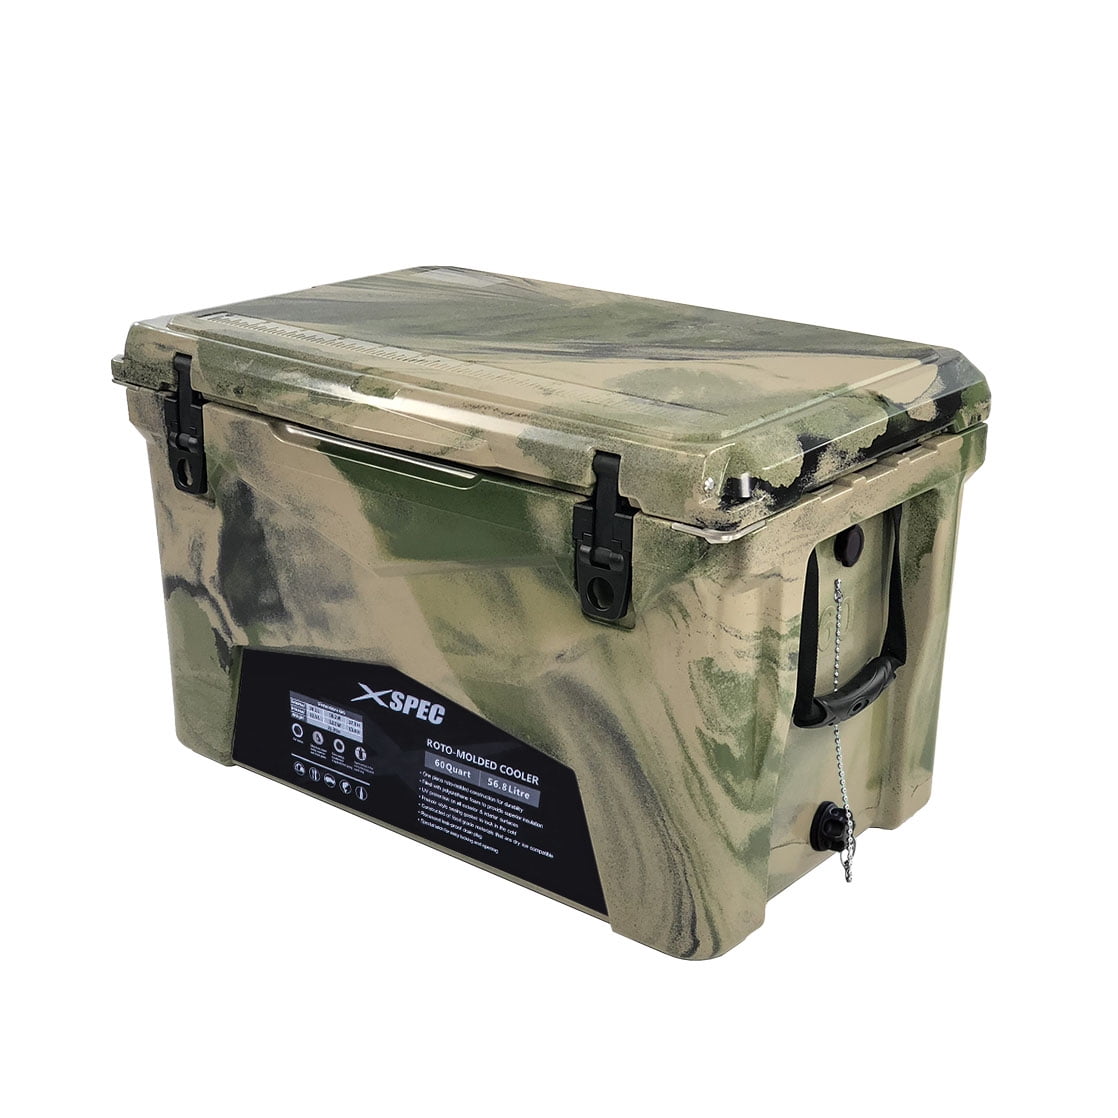 Ozark Trail 52 QT High Performance Roto-Molded Cooler with 